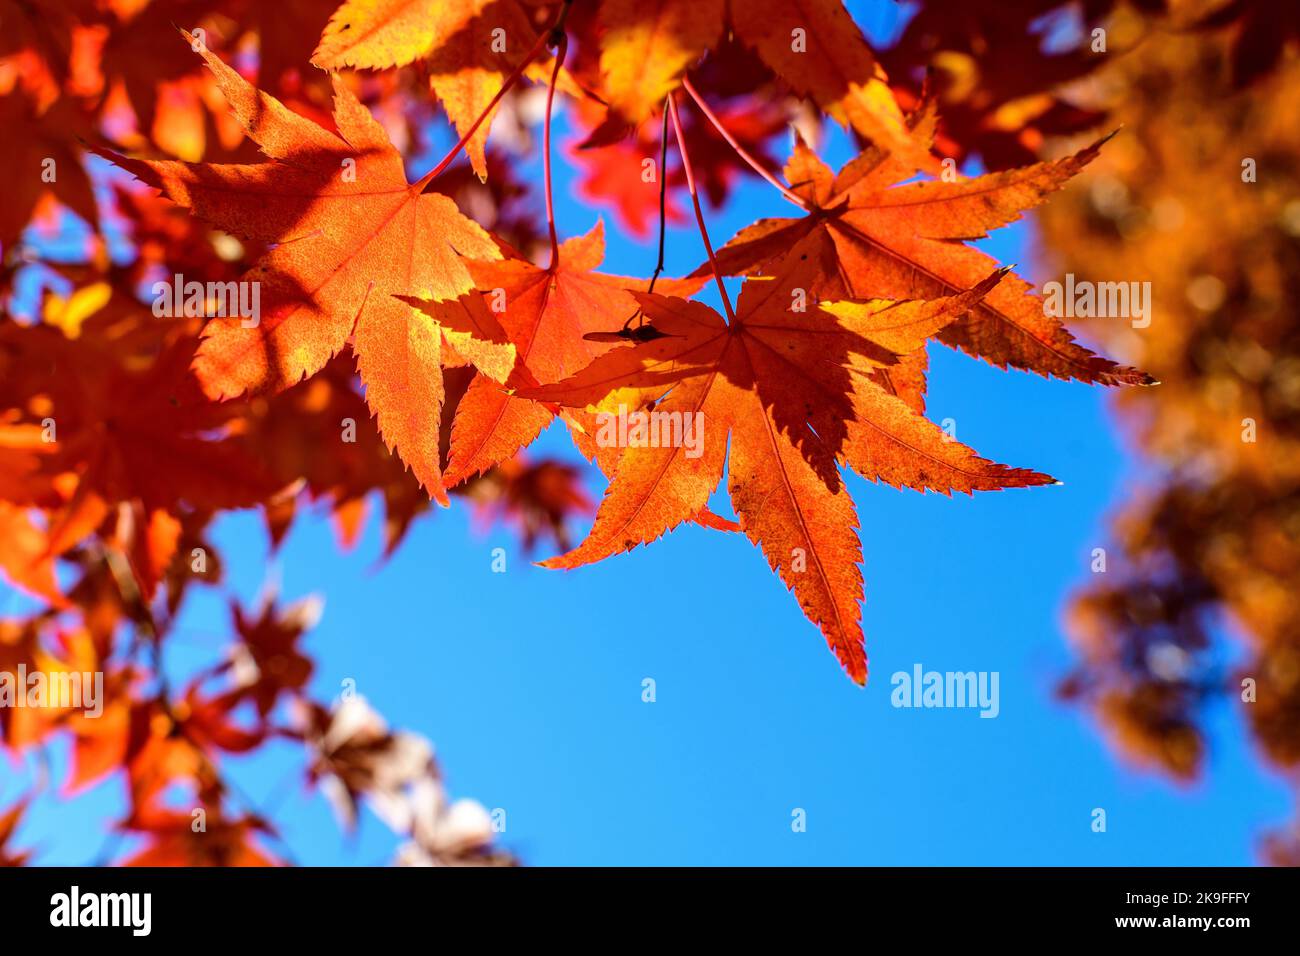 Vivid red and orange leaves of Acer platanoides or Norway maple tree, towards clear blue sky in a garden during a sunny autumn day, beautiful outdoor Stock Photo